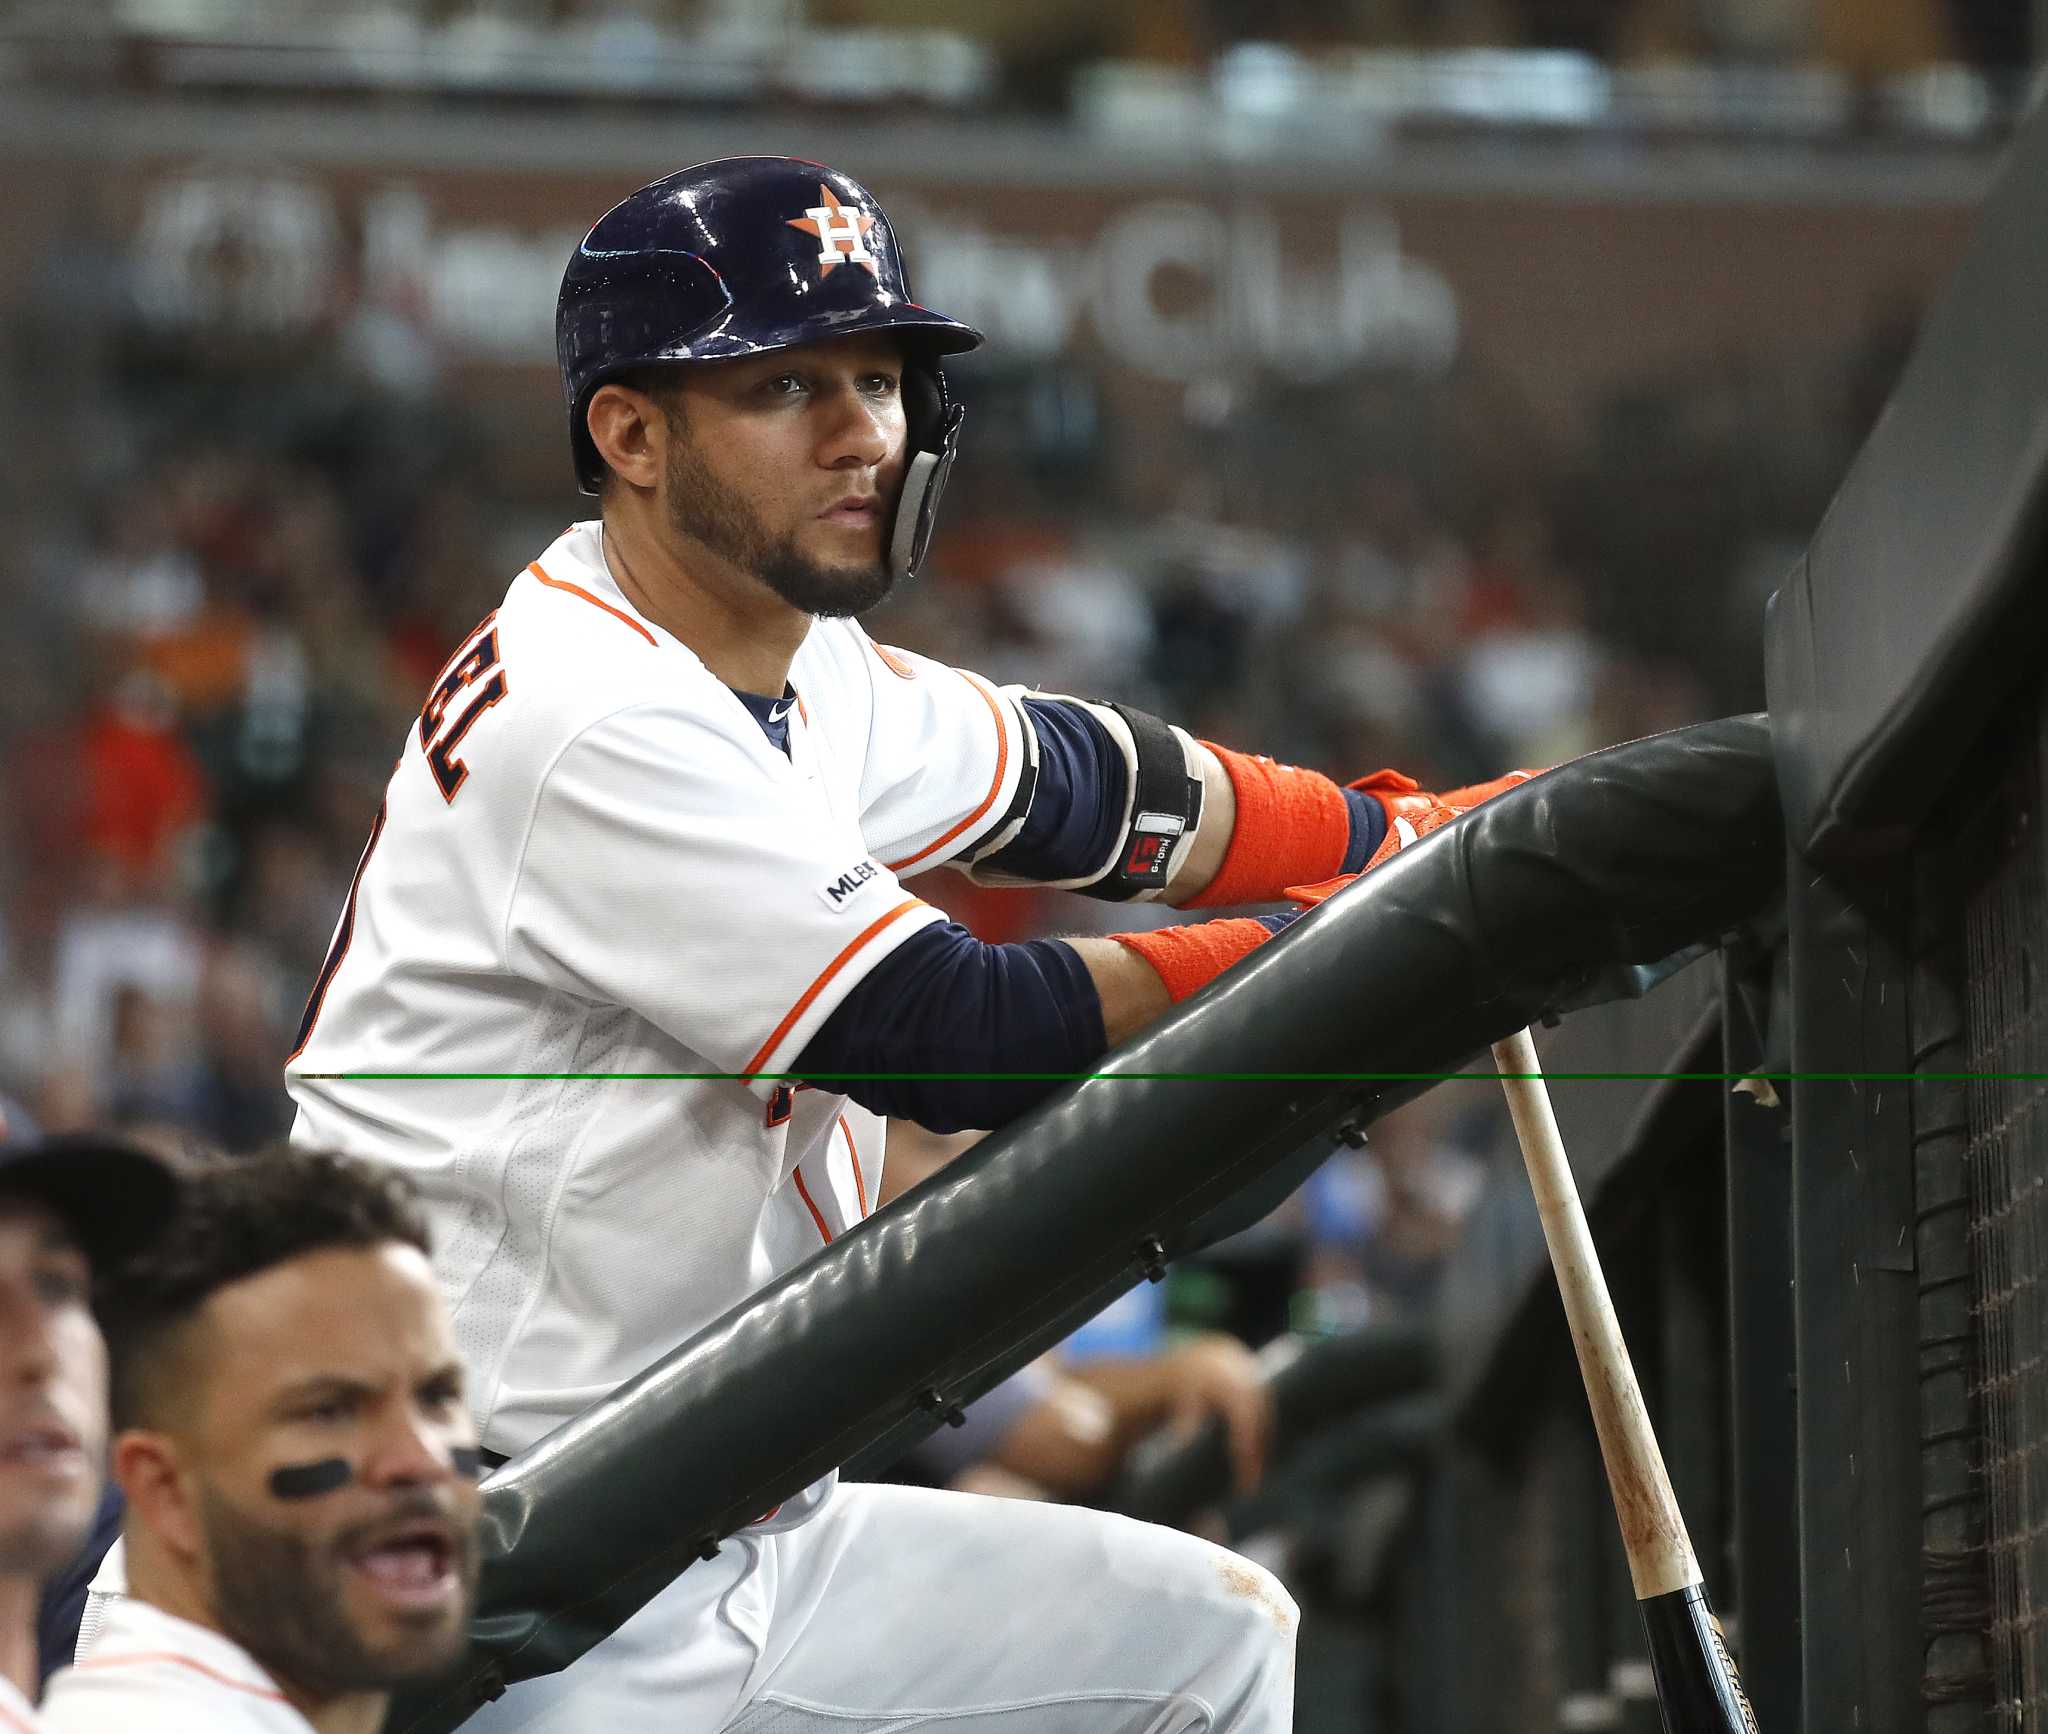 A crazy eight: Yuli Gurriel ties team RBI record as Astros rout Rockies